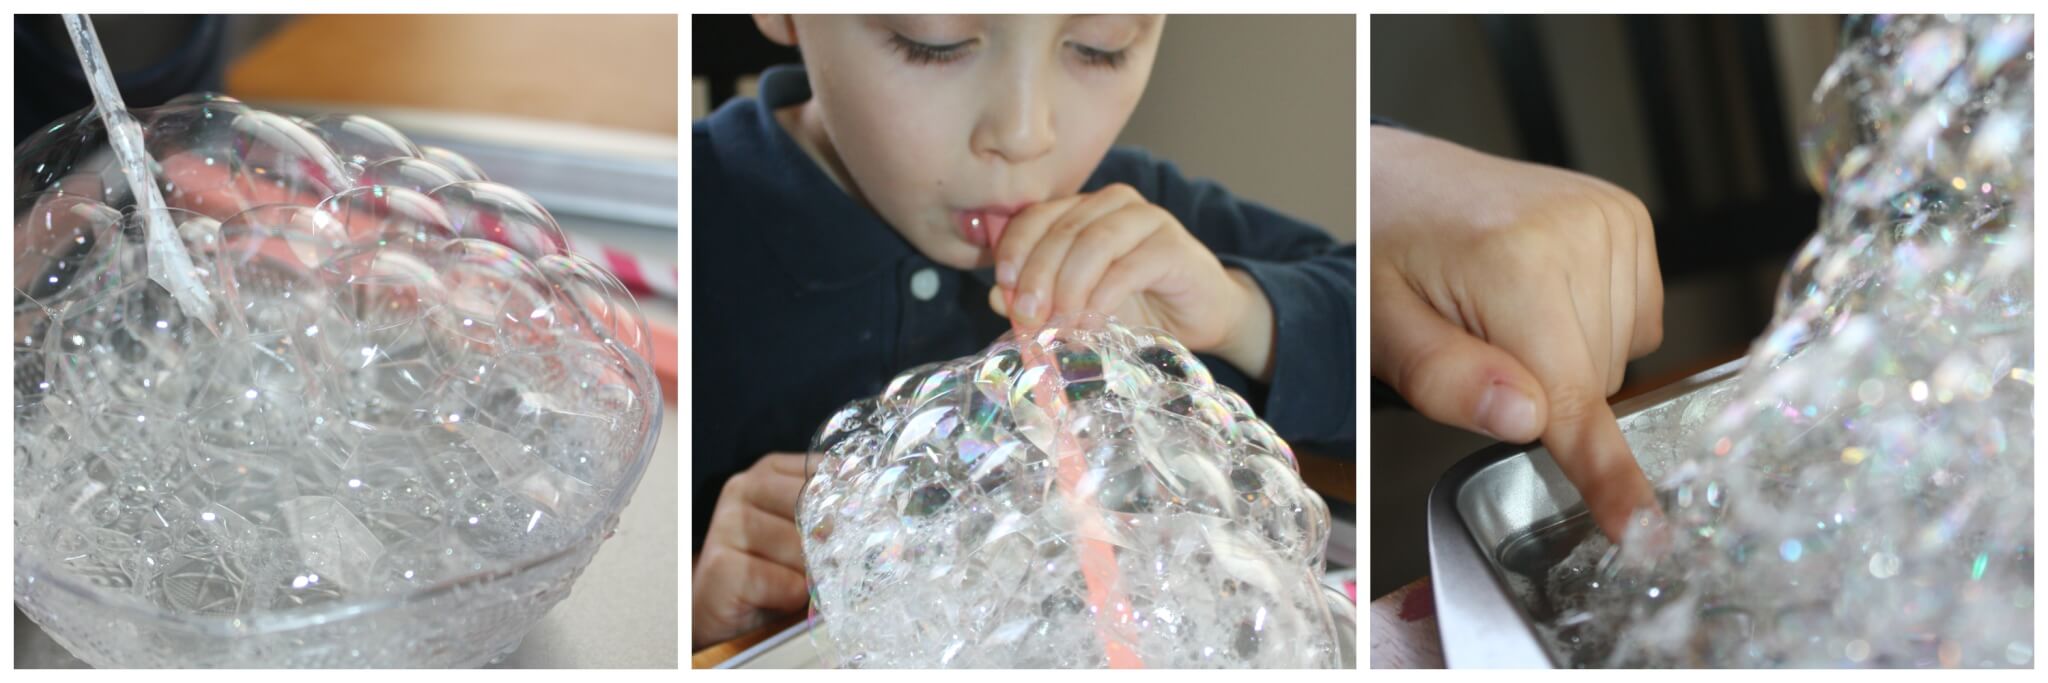 Bubble Science Projects and Experiment Ideas